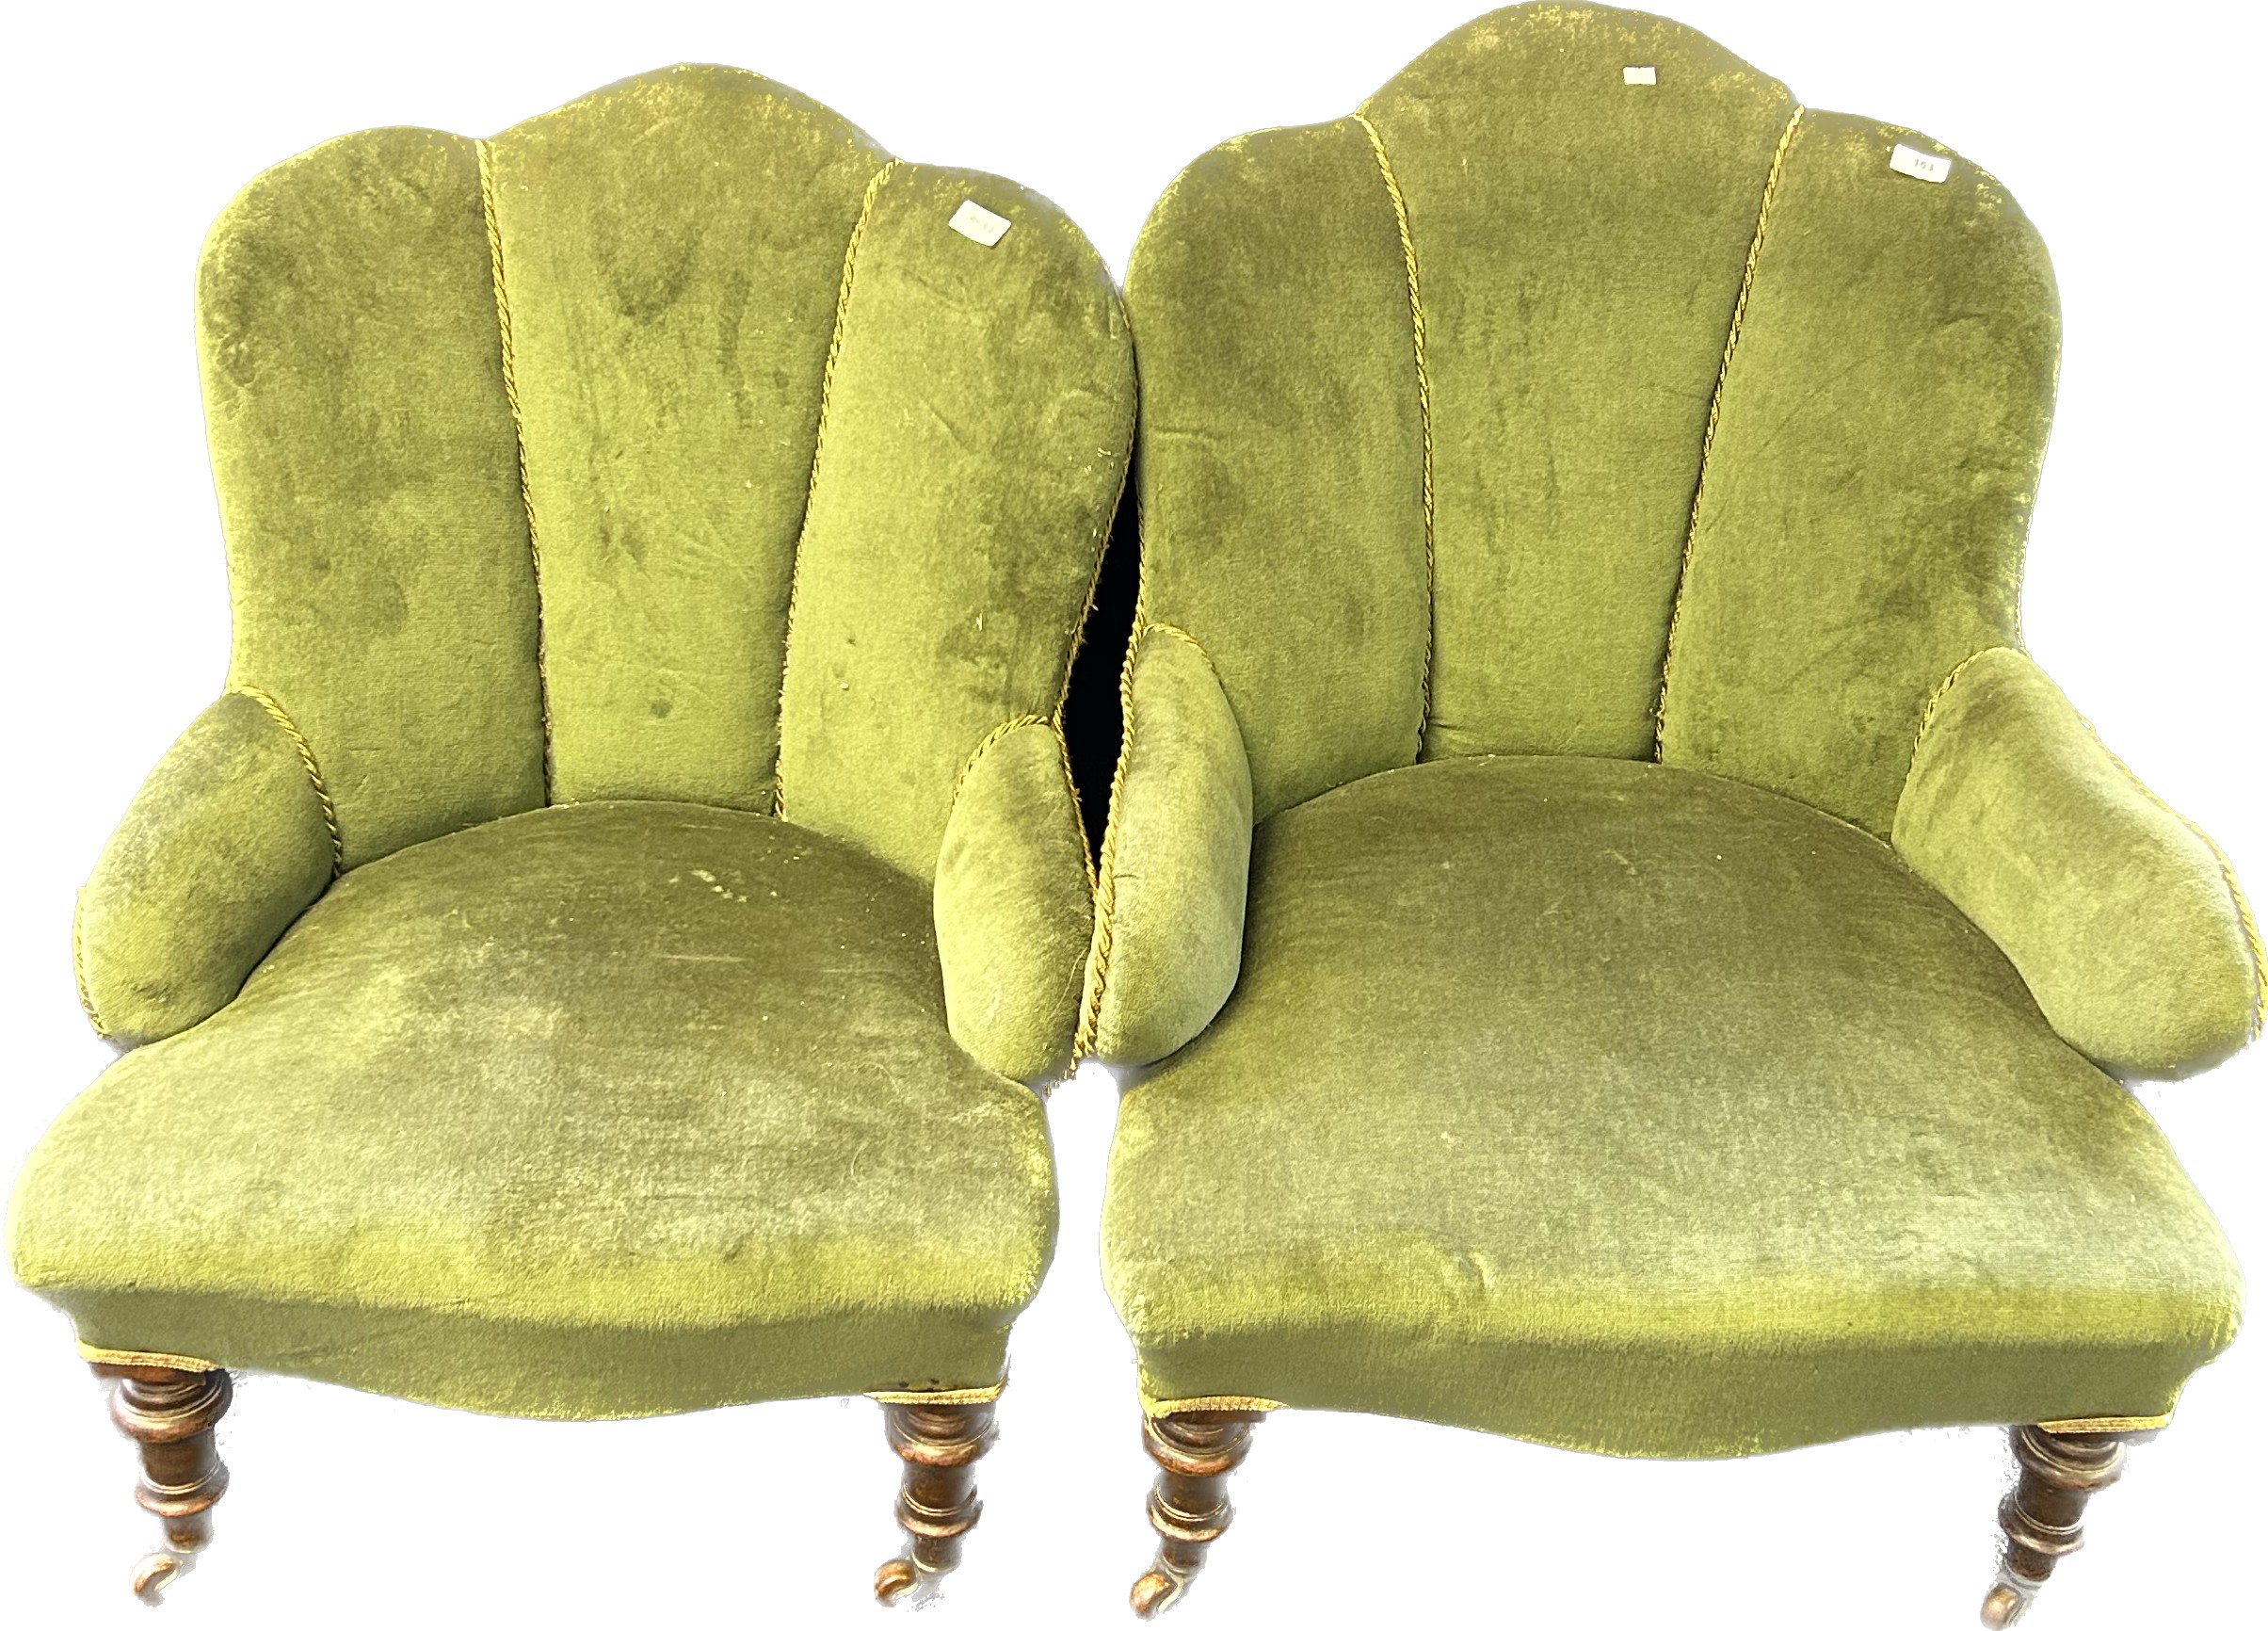 Pair of art deco cushioned chairs, covered in a green upholstery, raised on turned tapered legs - Image 4 of 5